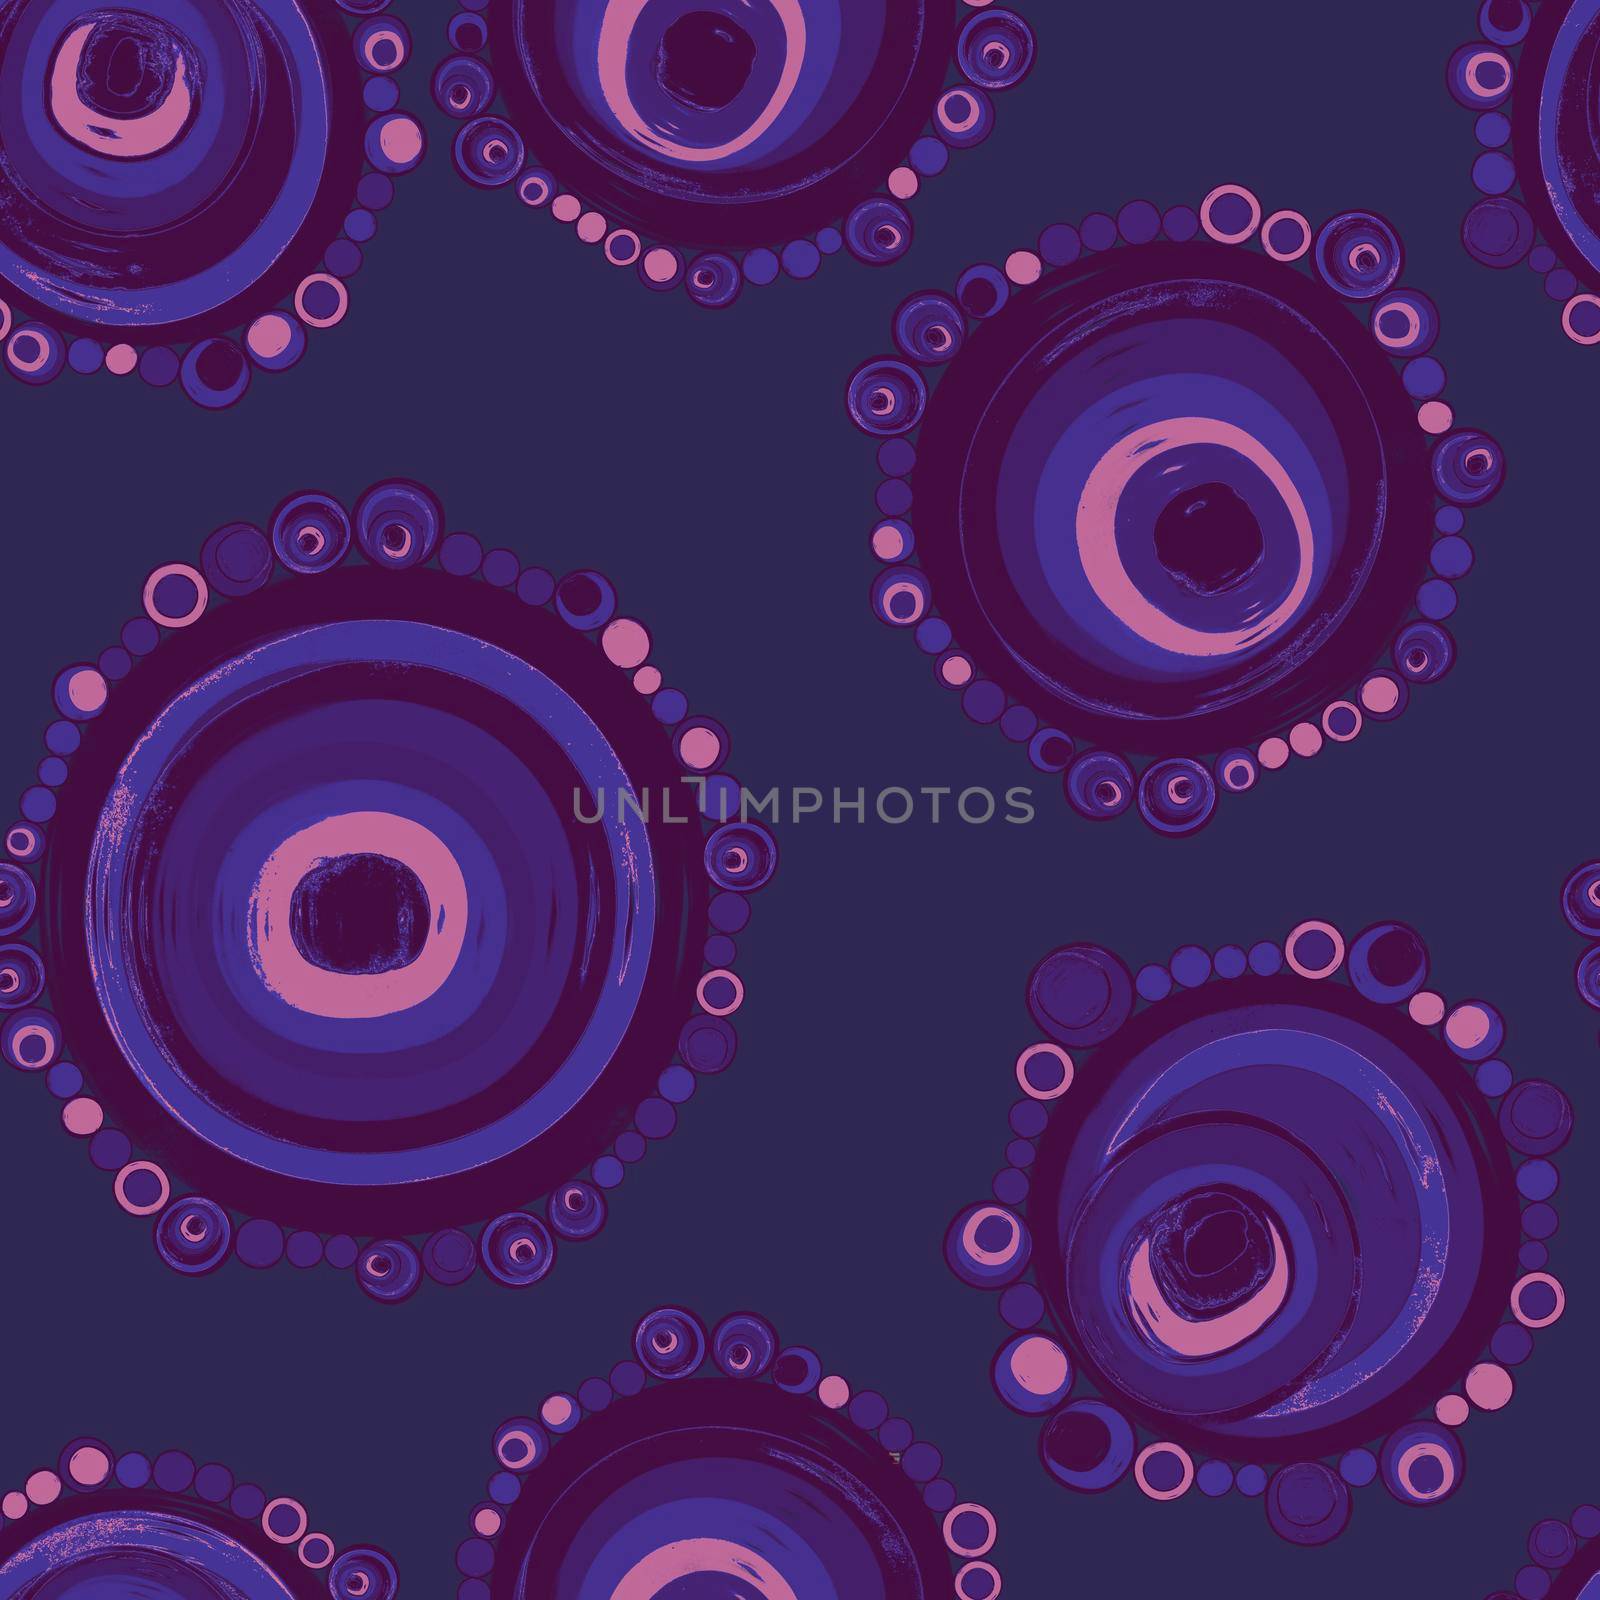 Geometric seamless pattern,texture with perfectly contacting nested circles with different size colors.Repeating pattern with circles filled with dots.For textile,wrapping paper,banner.Purple on blue by Angelsmoon